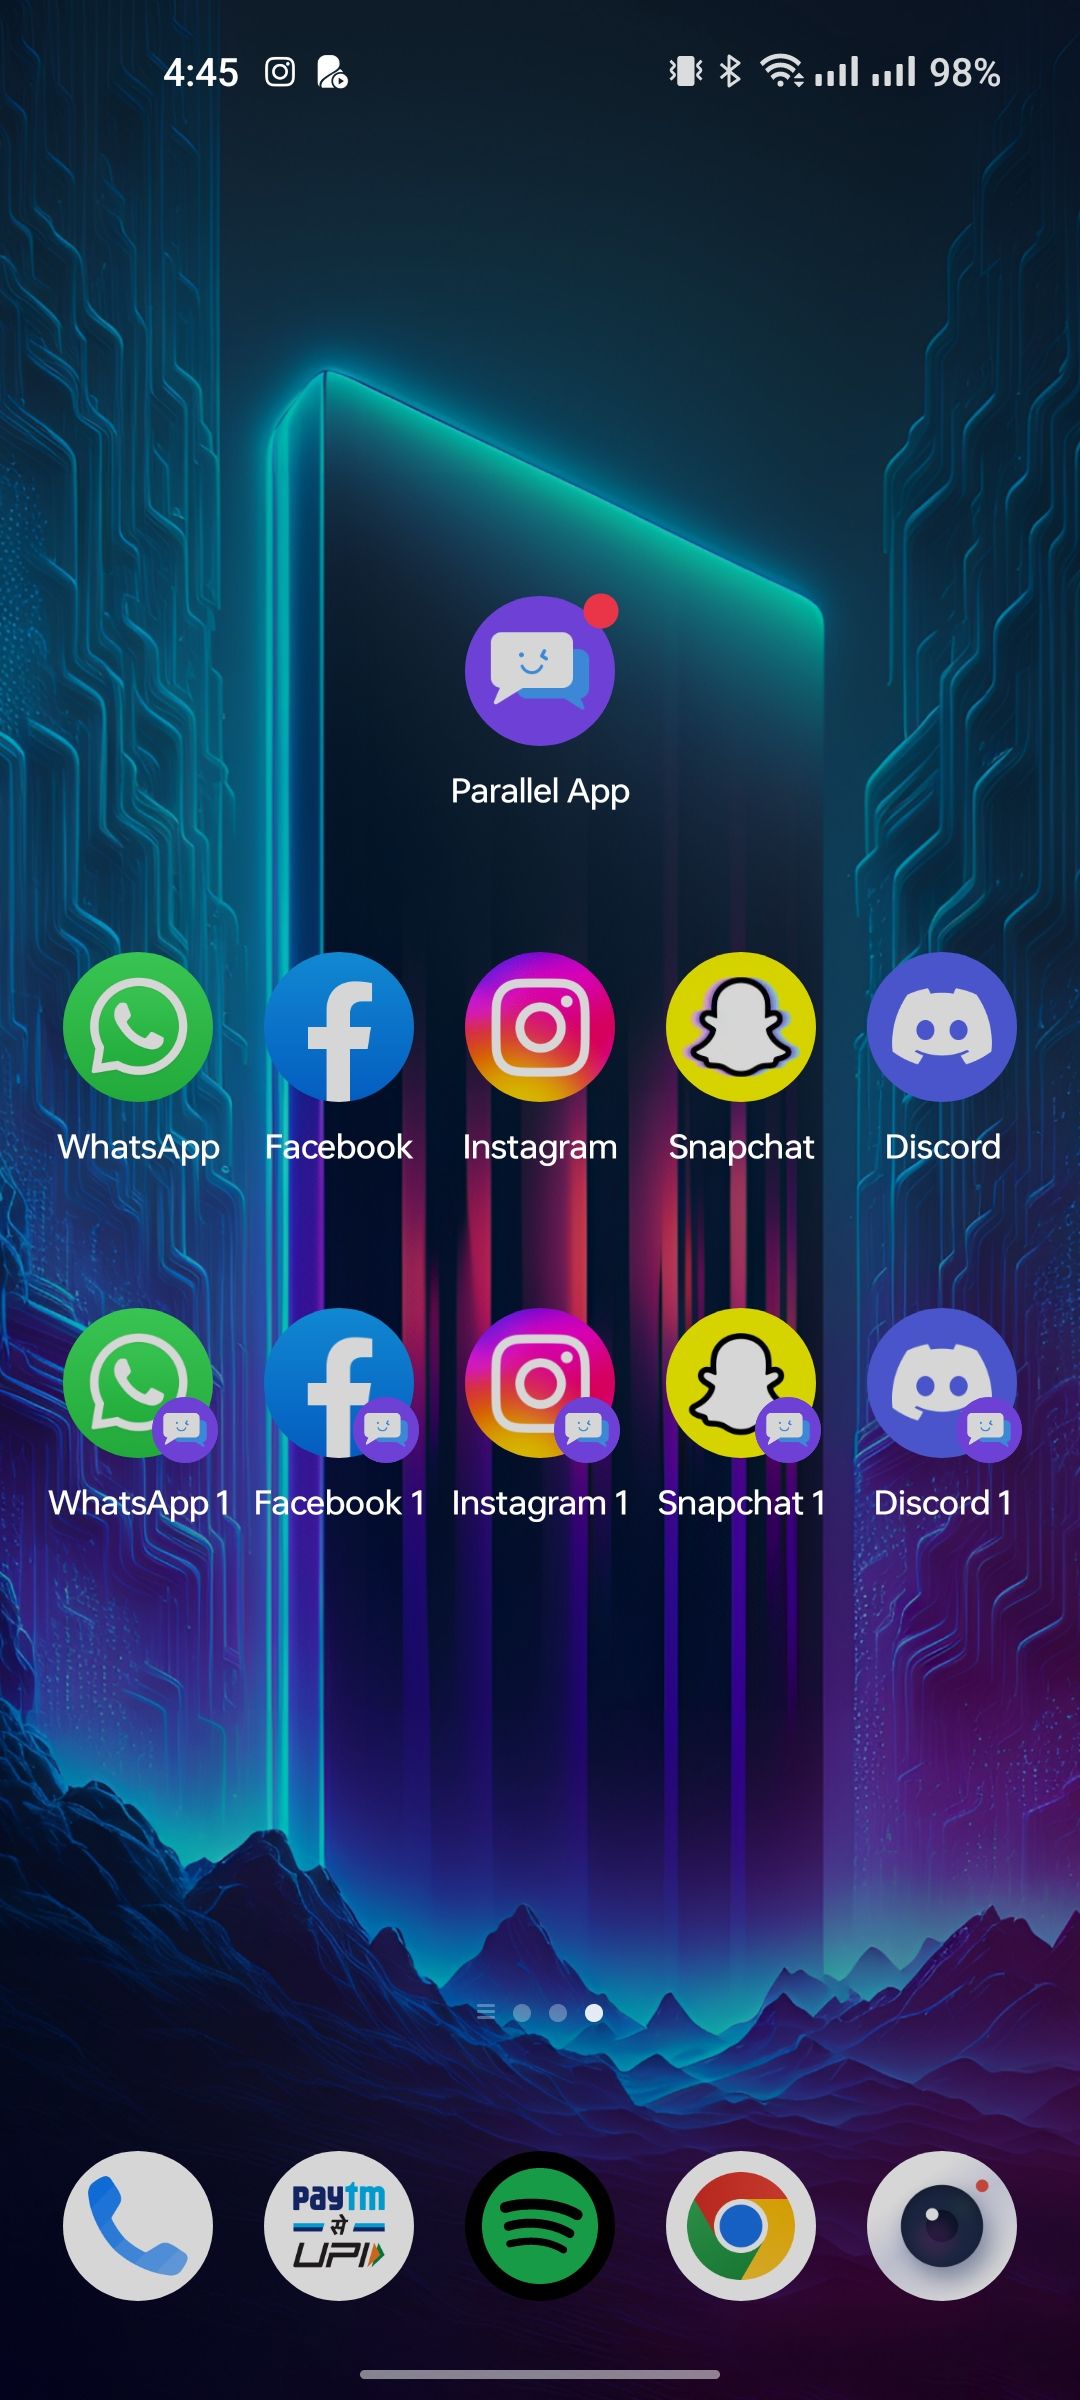 Parallel App shortcuts of social media apps on the home screen